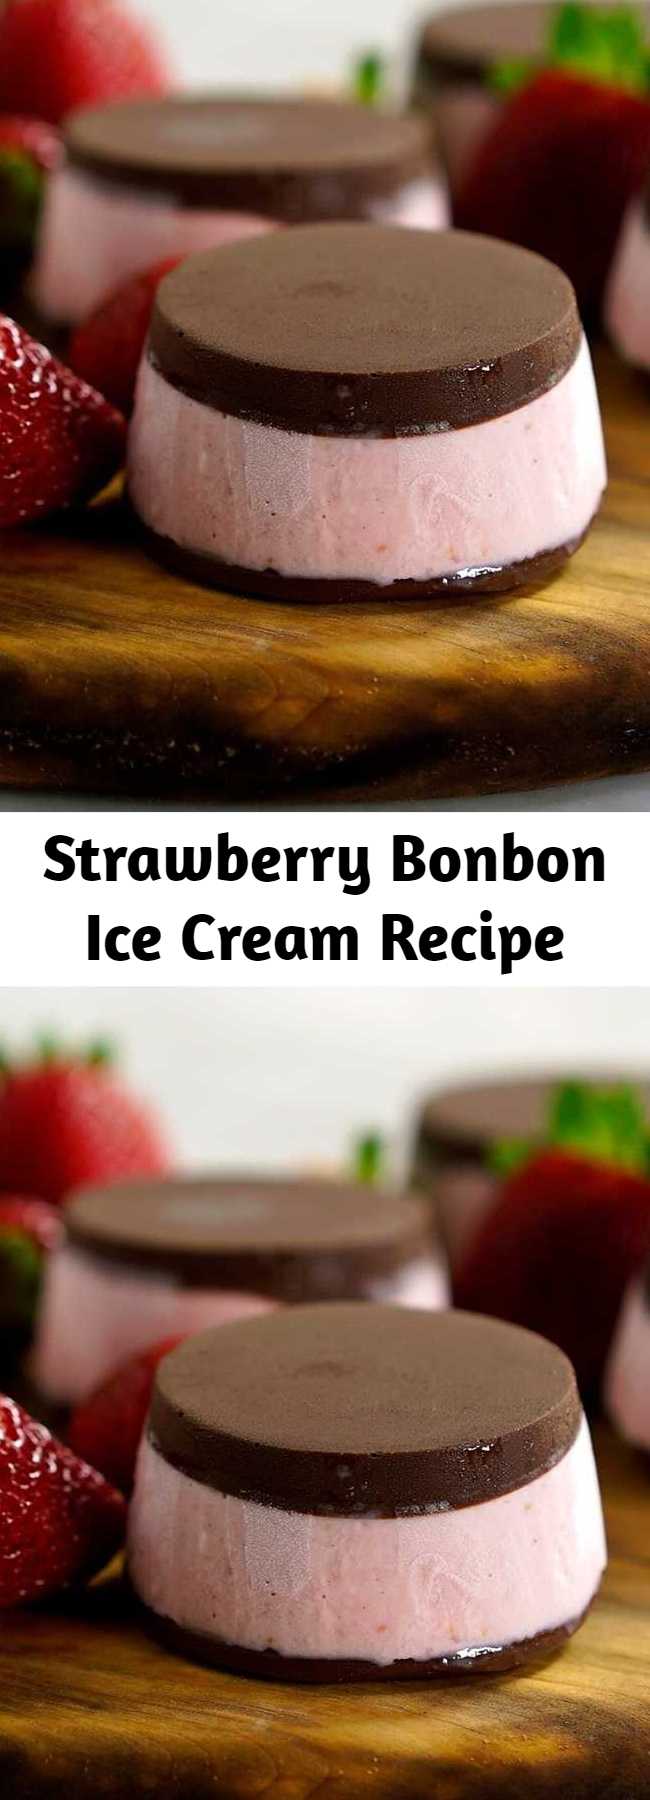 Strawberry Bonbon Ice Cream Recipe - Think of this as rich and fruity strawberry ice cream sandwiched between two incredible chocolate discs.